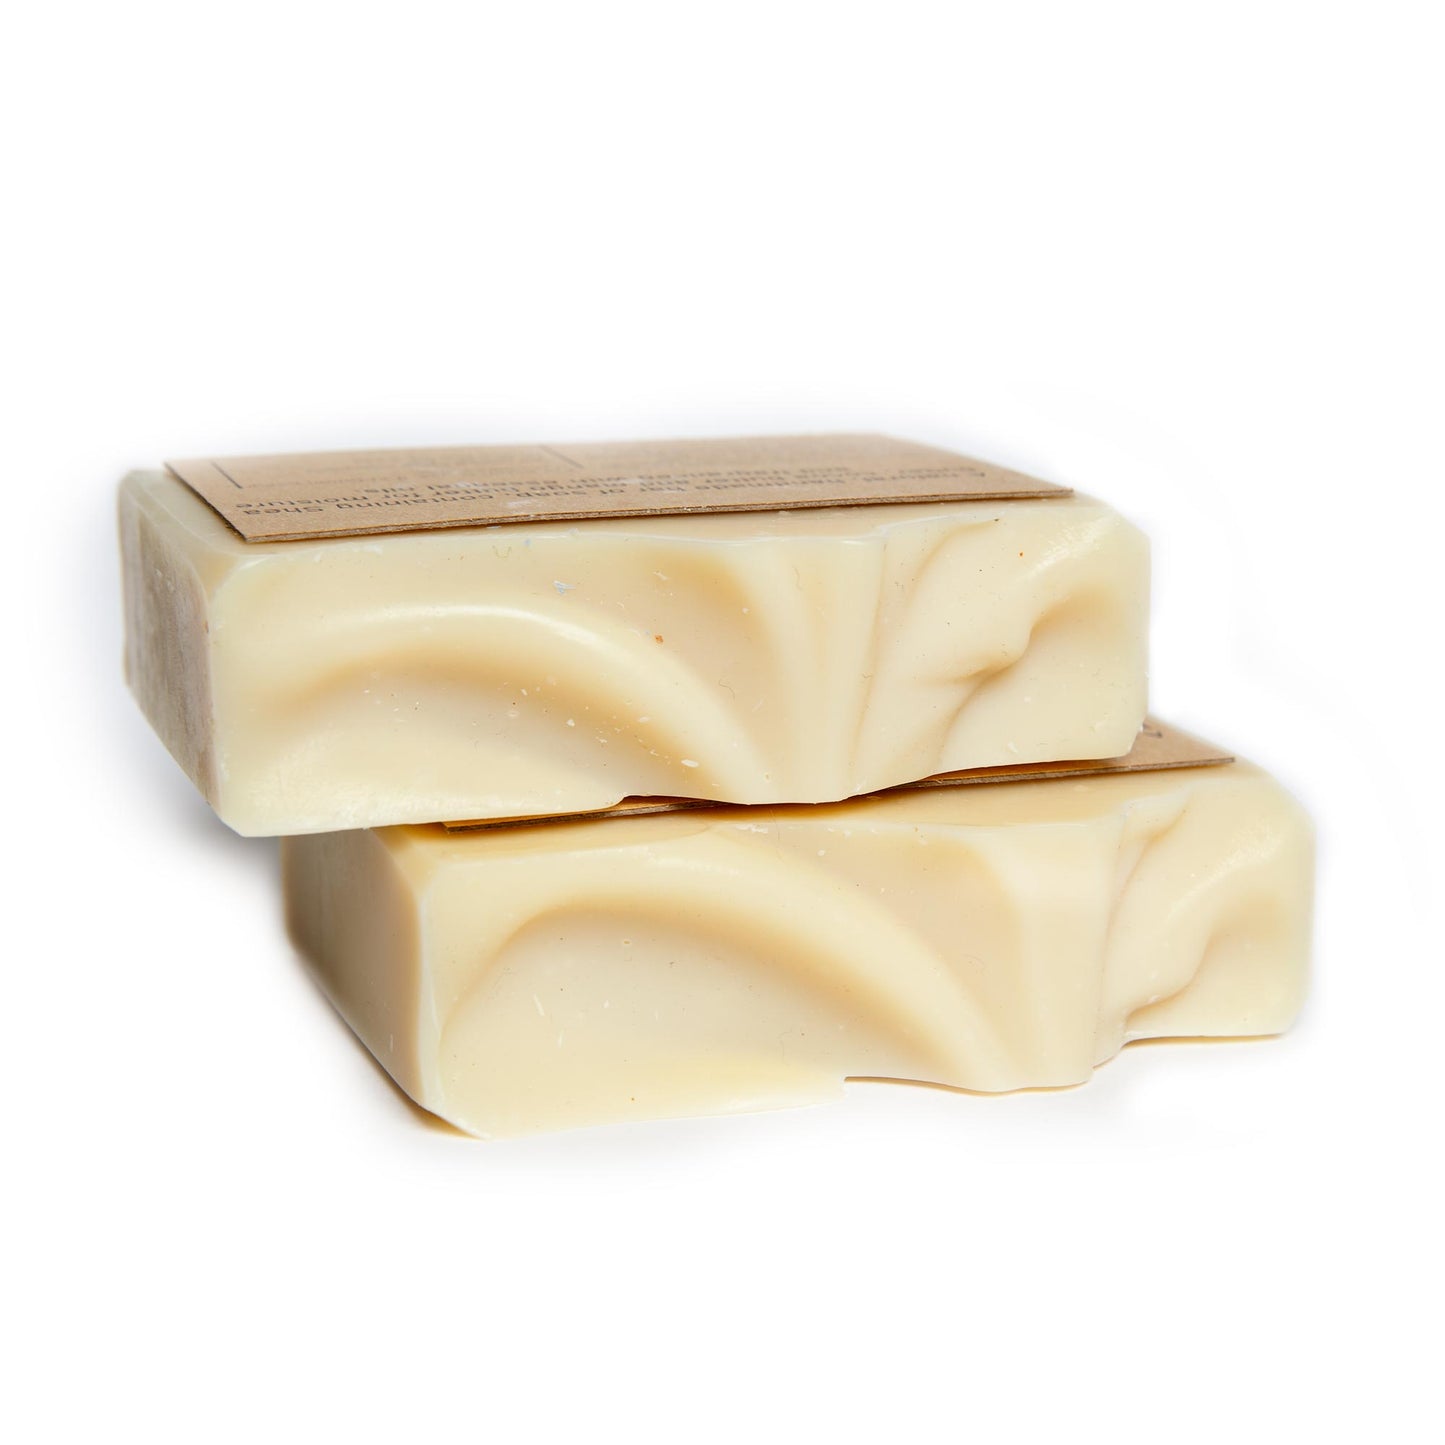 100% Plastic-free Peppermint Quench Vegan and Non-Toxic Body Soap.